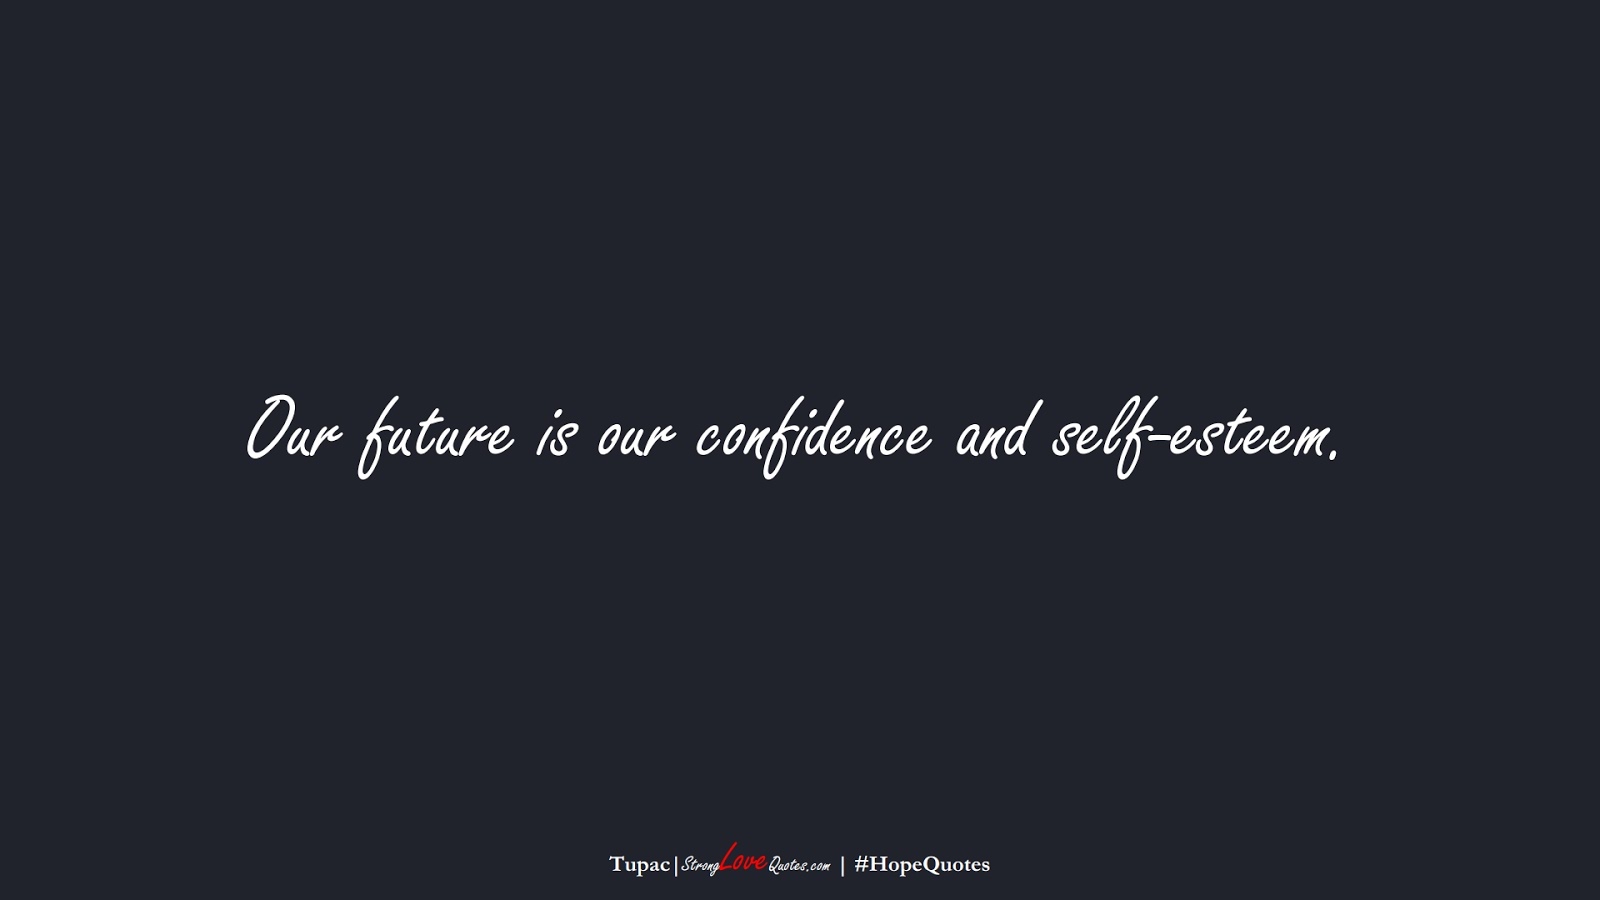 Our future is our confidence and self-esteem. (Tupac);  #HopeQuotes